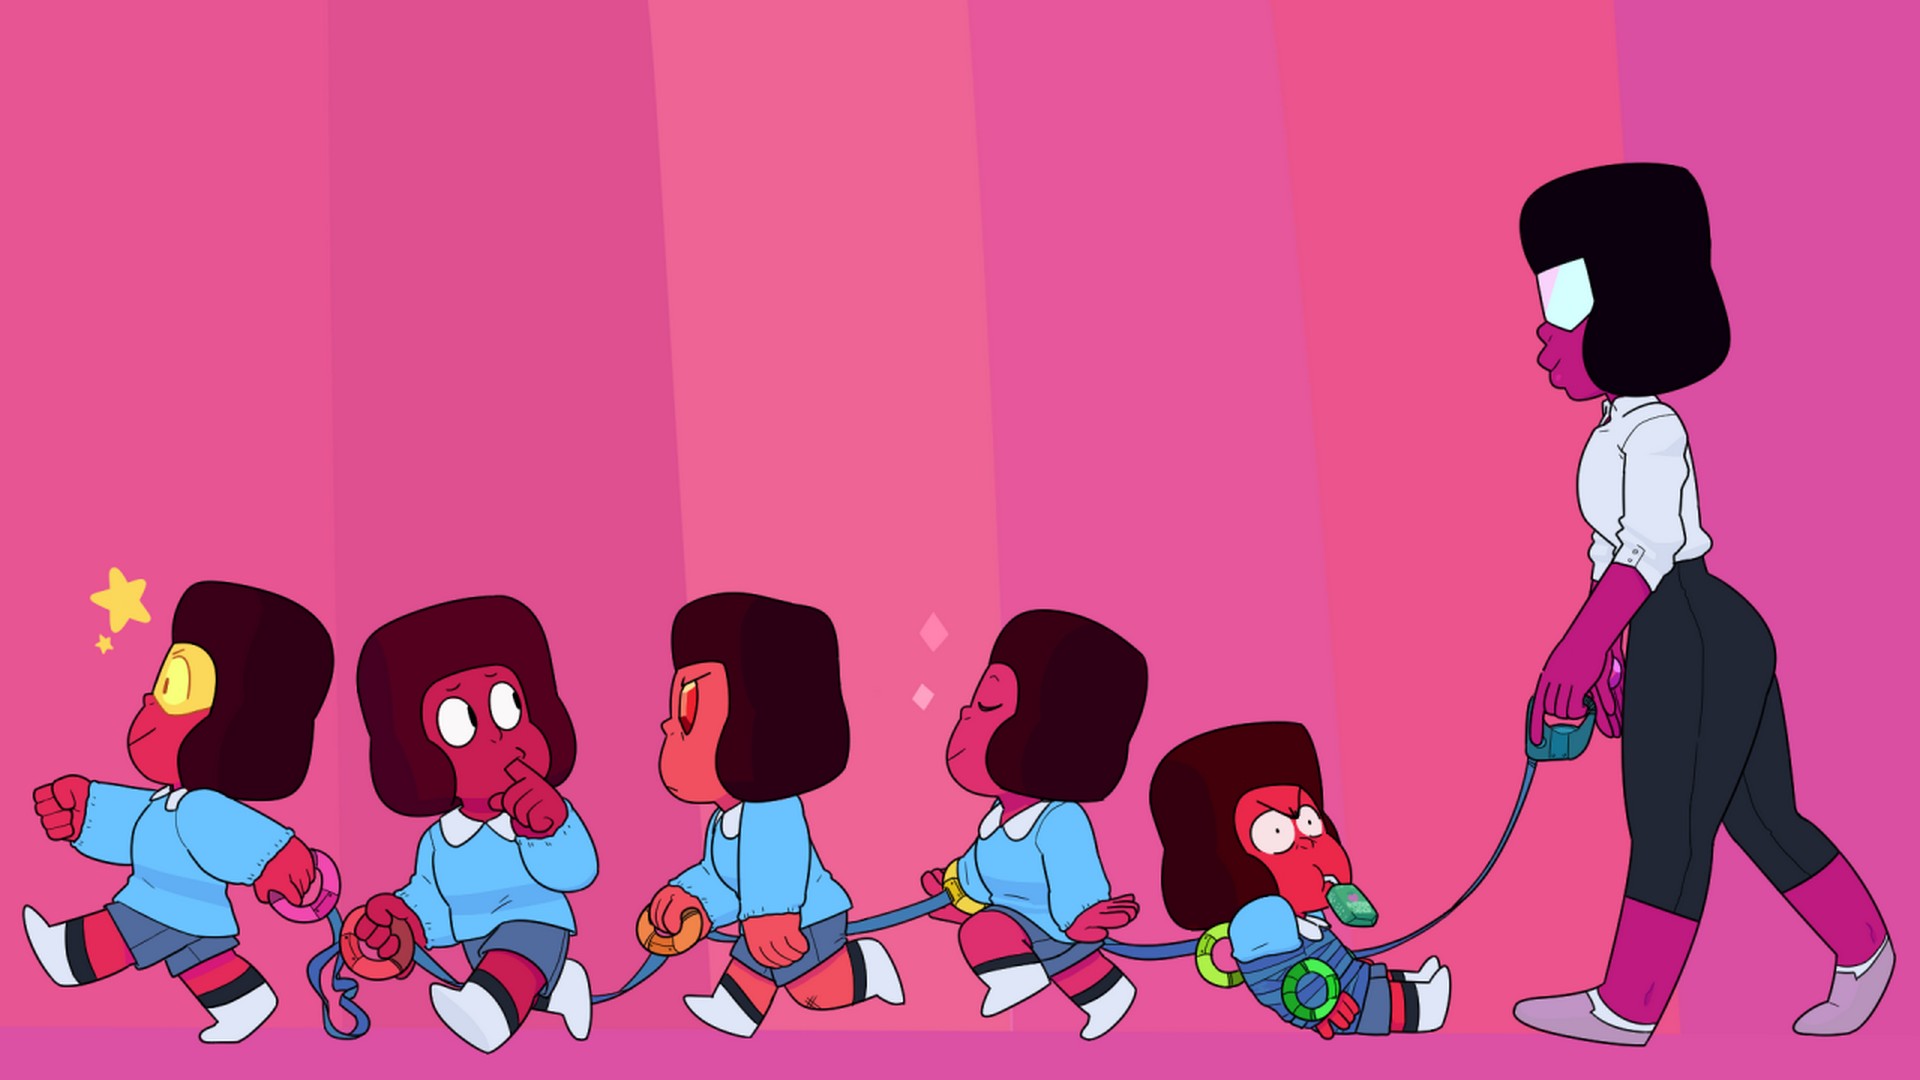 Steven Universe The Movie Background Wallpaper HD With high-resolution 1920X1080 pixel. You can use this wallpaper for your Desktop Computer Backgrounds, Mac Wallpapers, Android Lock screen or iPhone Screensavers and another smartphone device